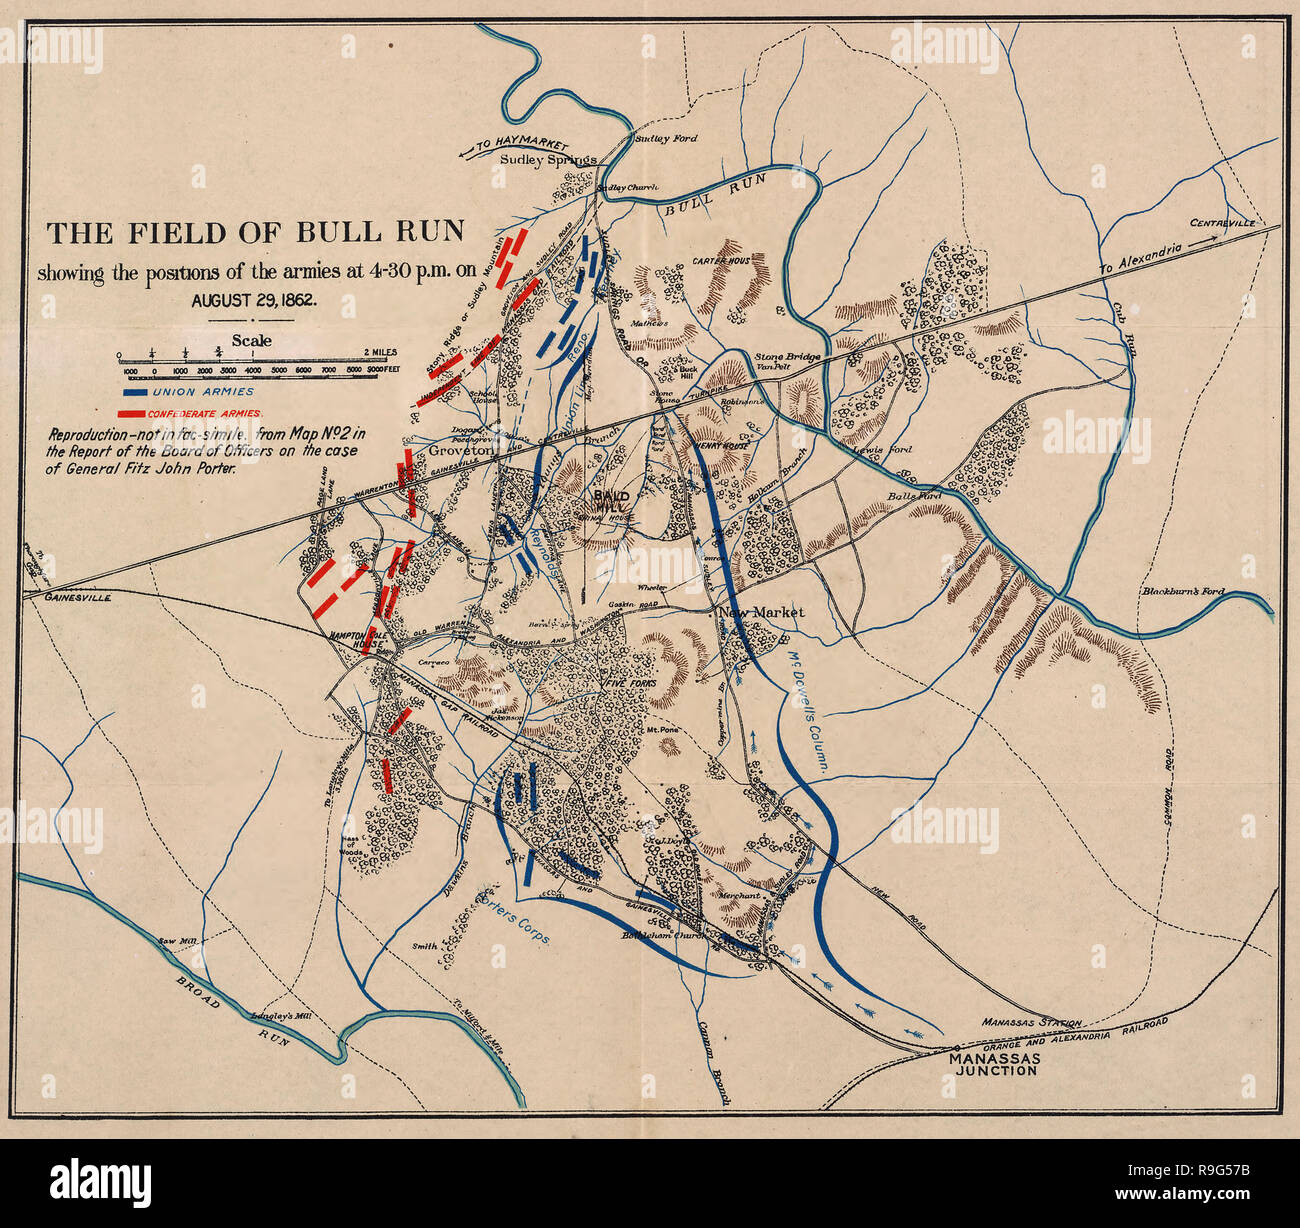 The field of Bull Run : showing the positions of the armies at 4:30 p.m. on August 29, 1862. The Second Battle of Bull Run - American Civil War Stock Photo